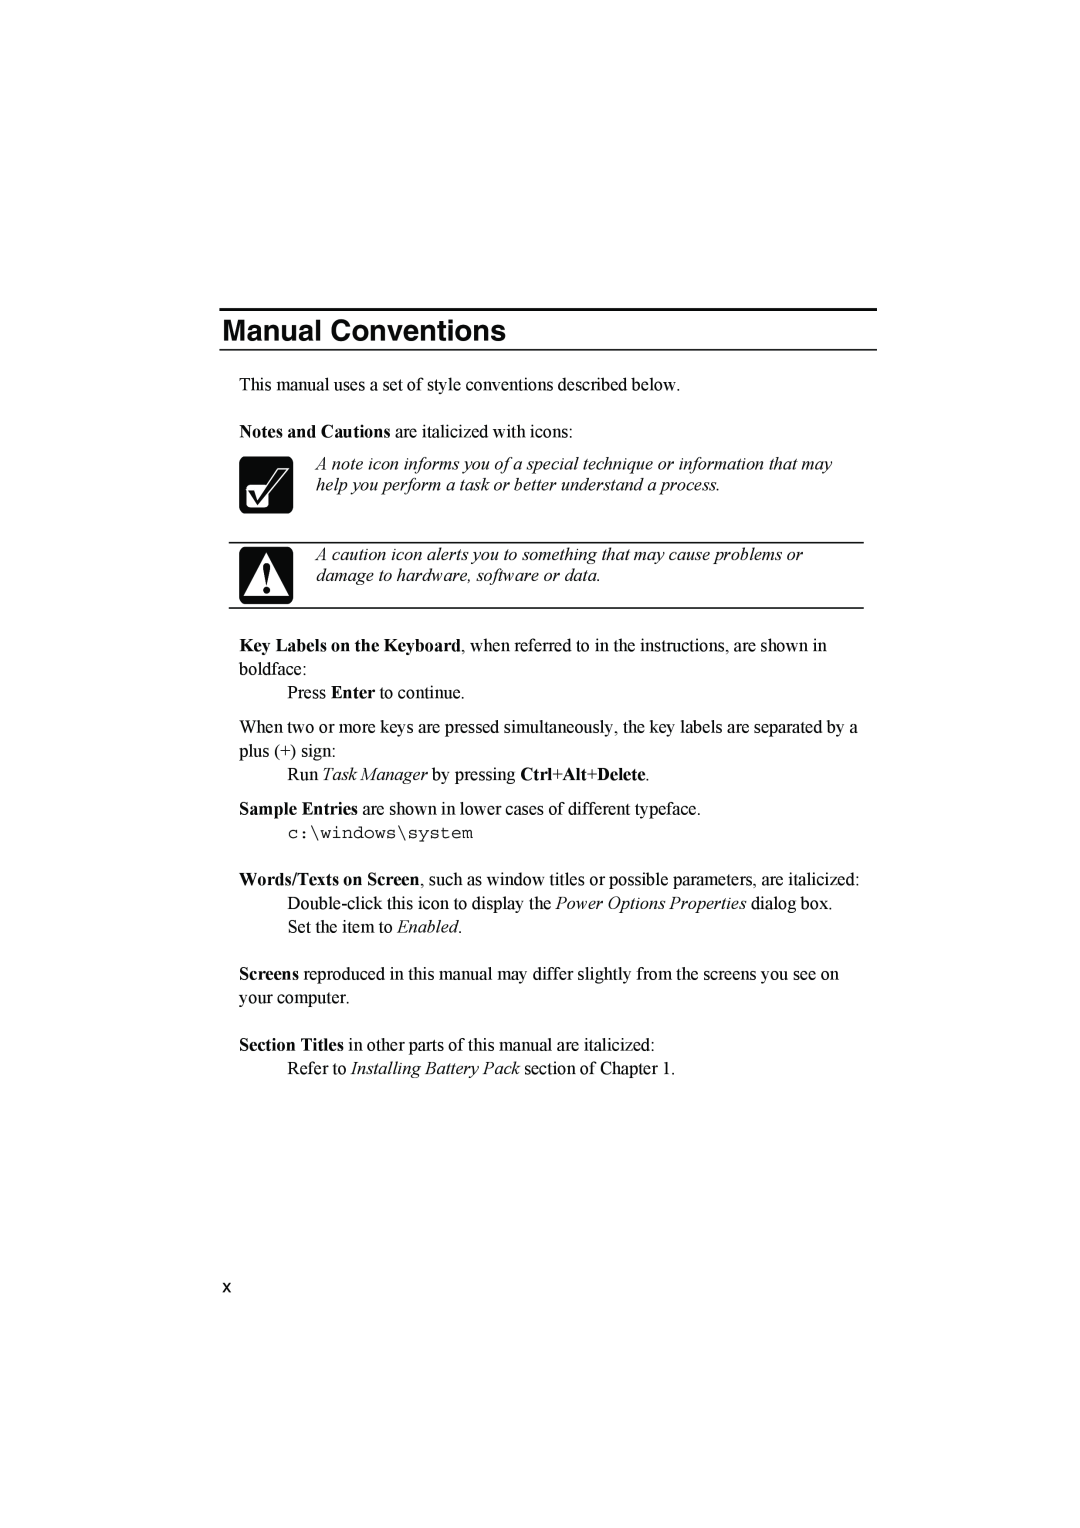 Sharp PC-MM1 manual Manual Conventions 